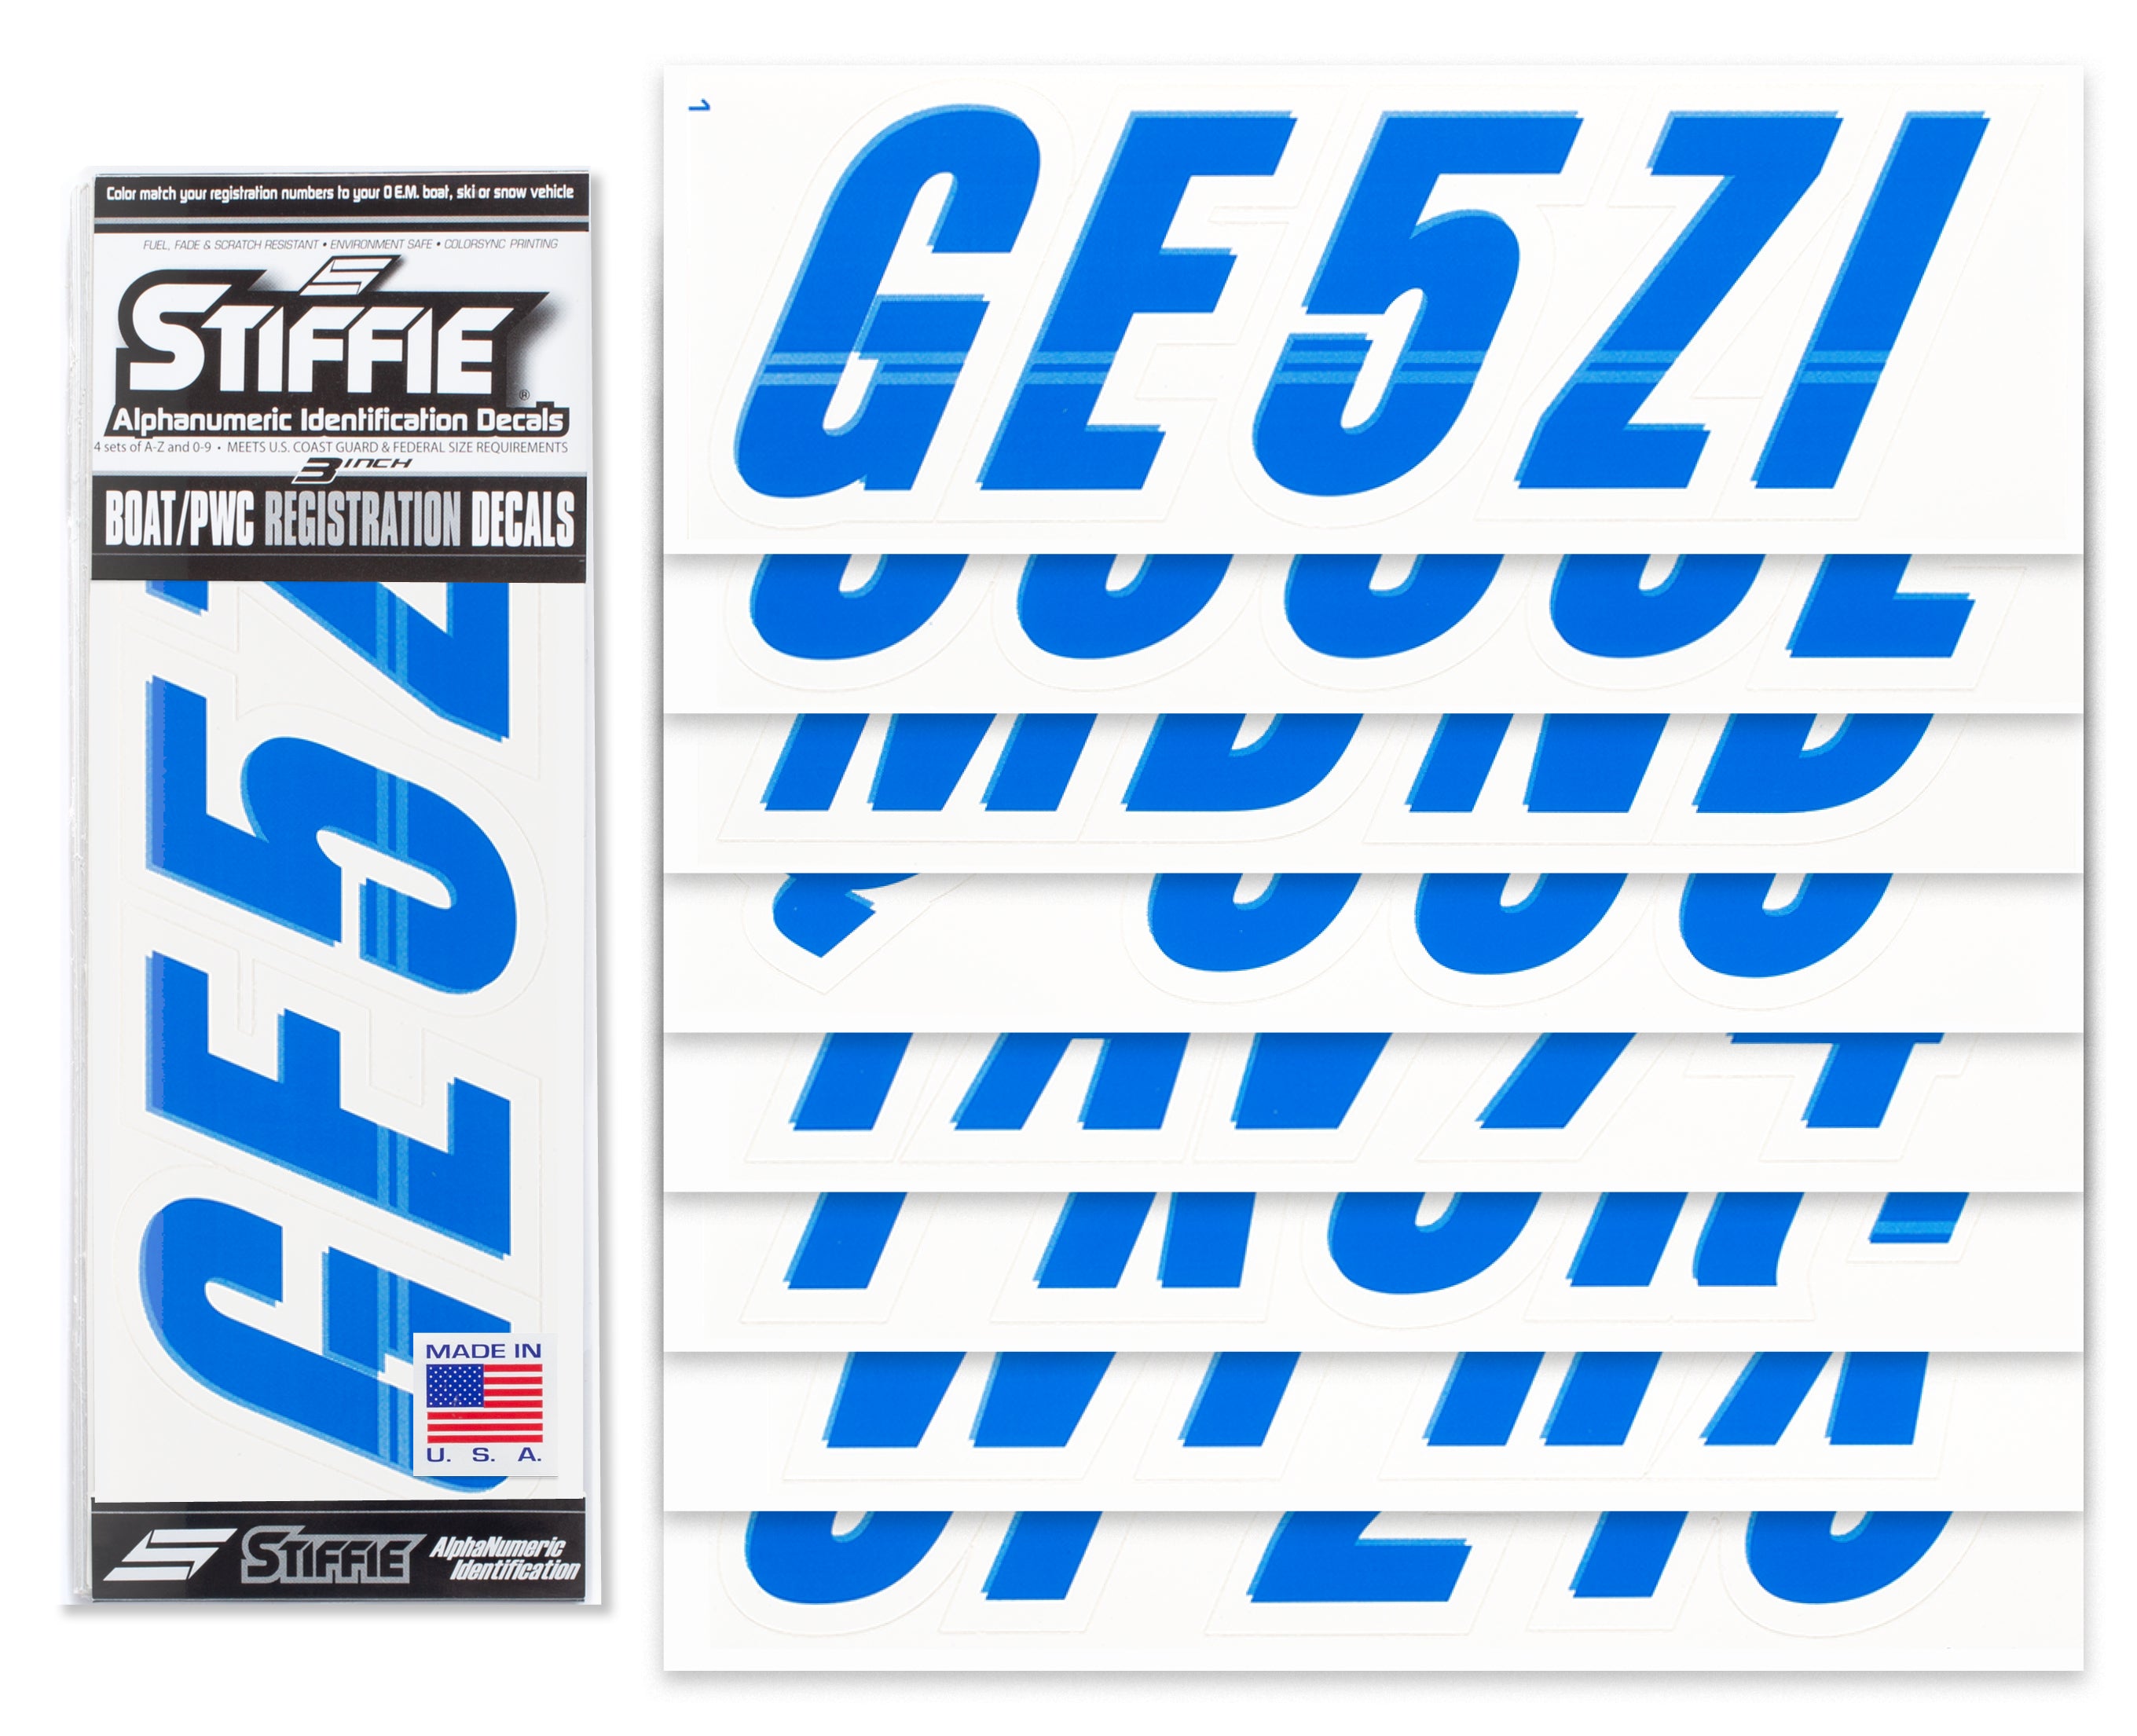 STIFFIE Techtron Blue/White 3" Alpha-Numeric Registration Identification Numbers Stickers Decals for Boats & Personal Watercraft